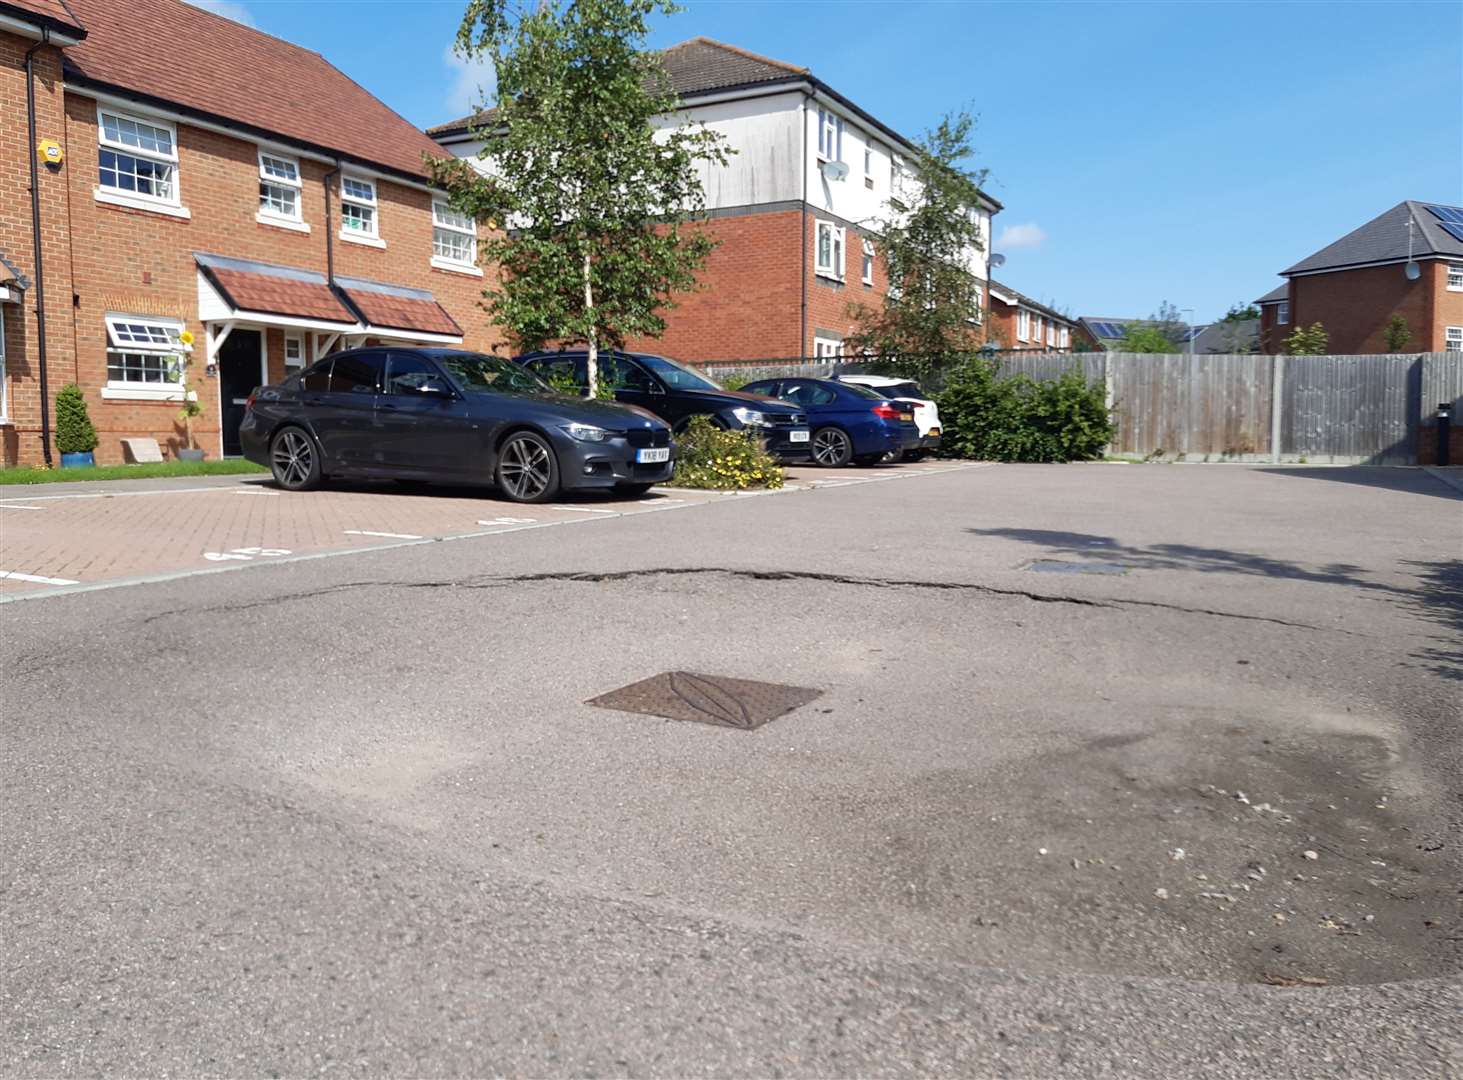 A crater developing in Copper Beech Close, Barming, Maidstone